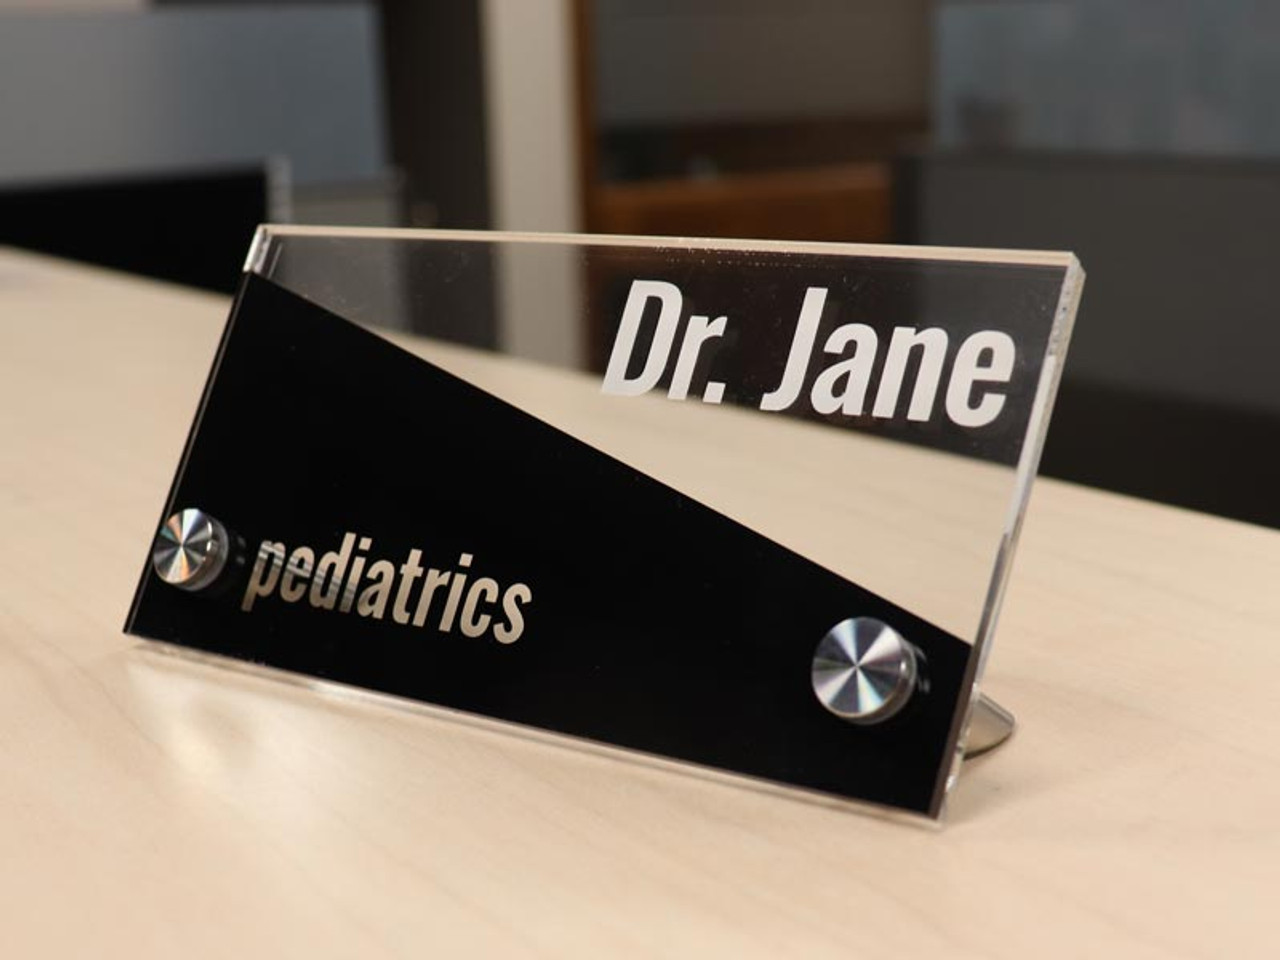 Personalized Name Plate Sign for Office Desk or Door 2" X 8" Customized